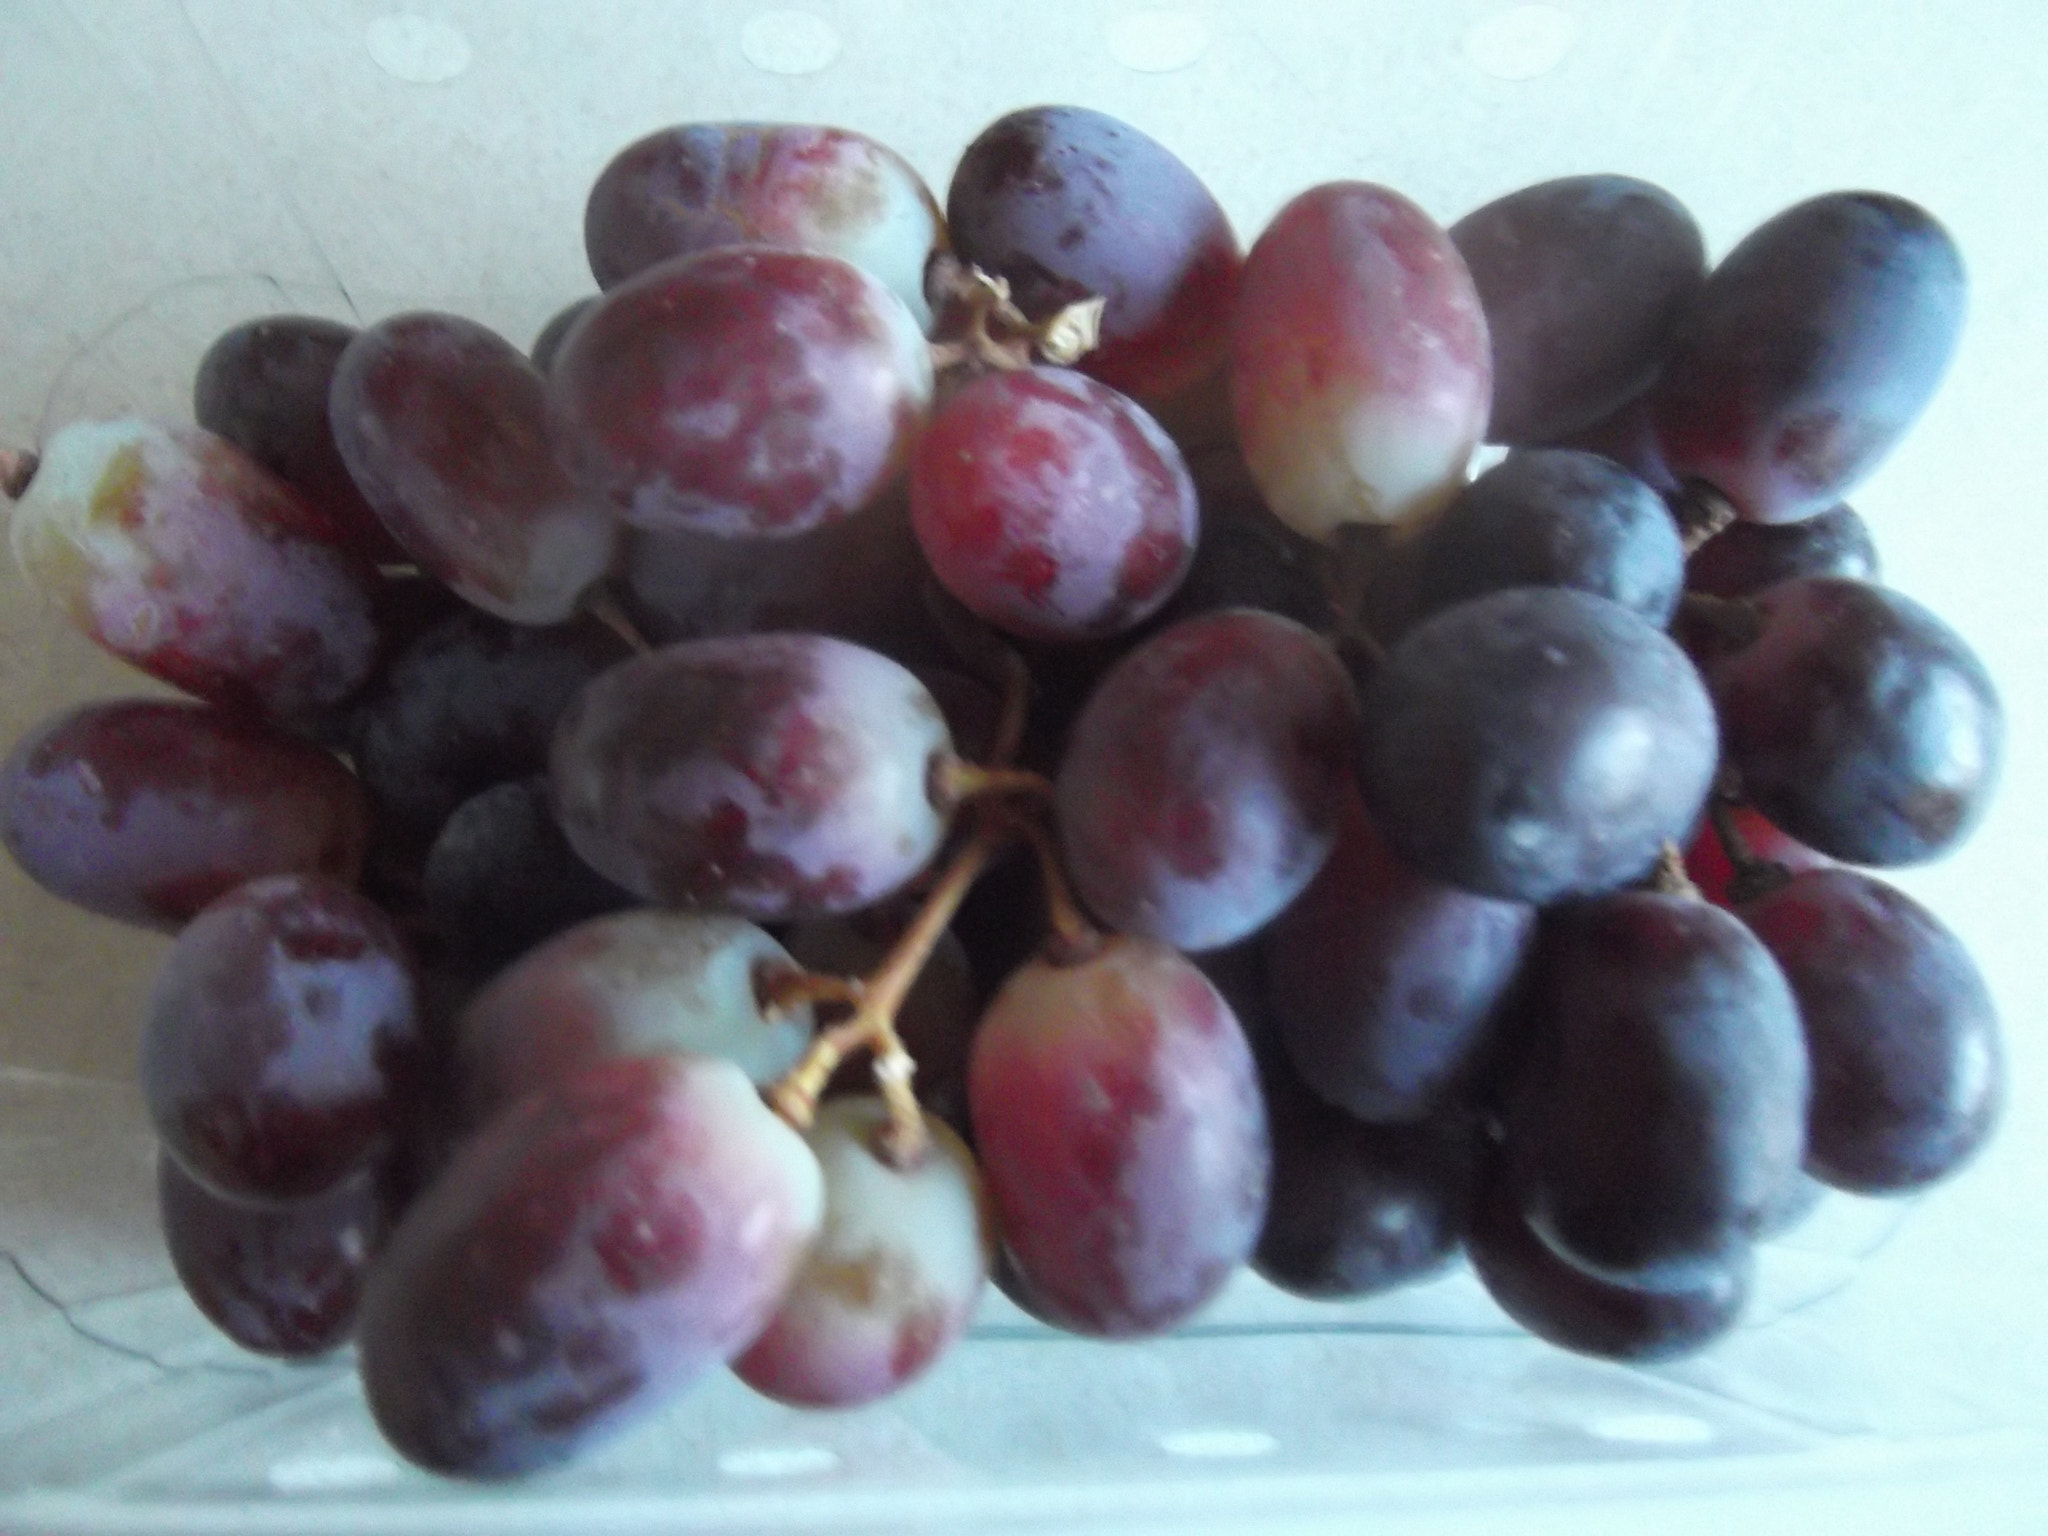 Fujifilm FinePix T350 sample photo. Red grapes photography